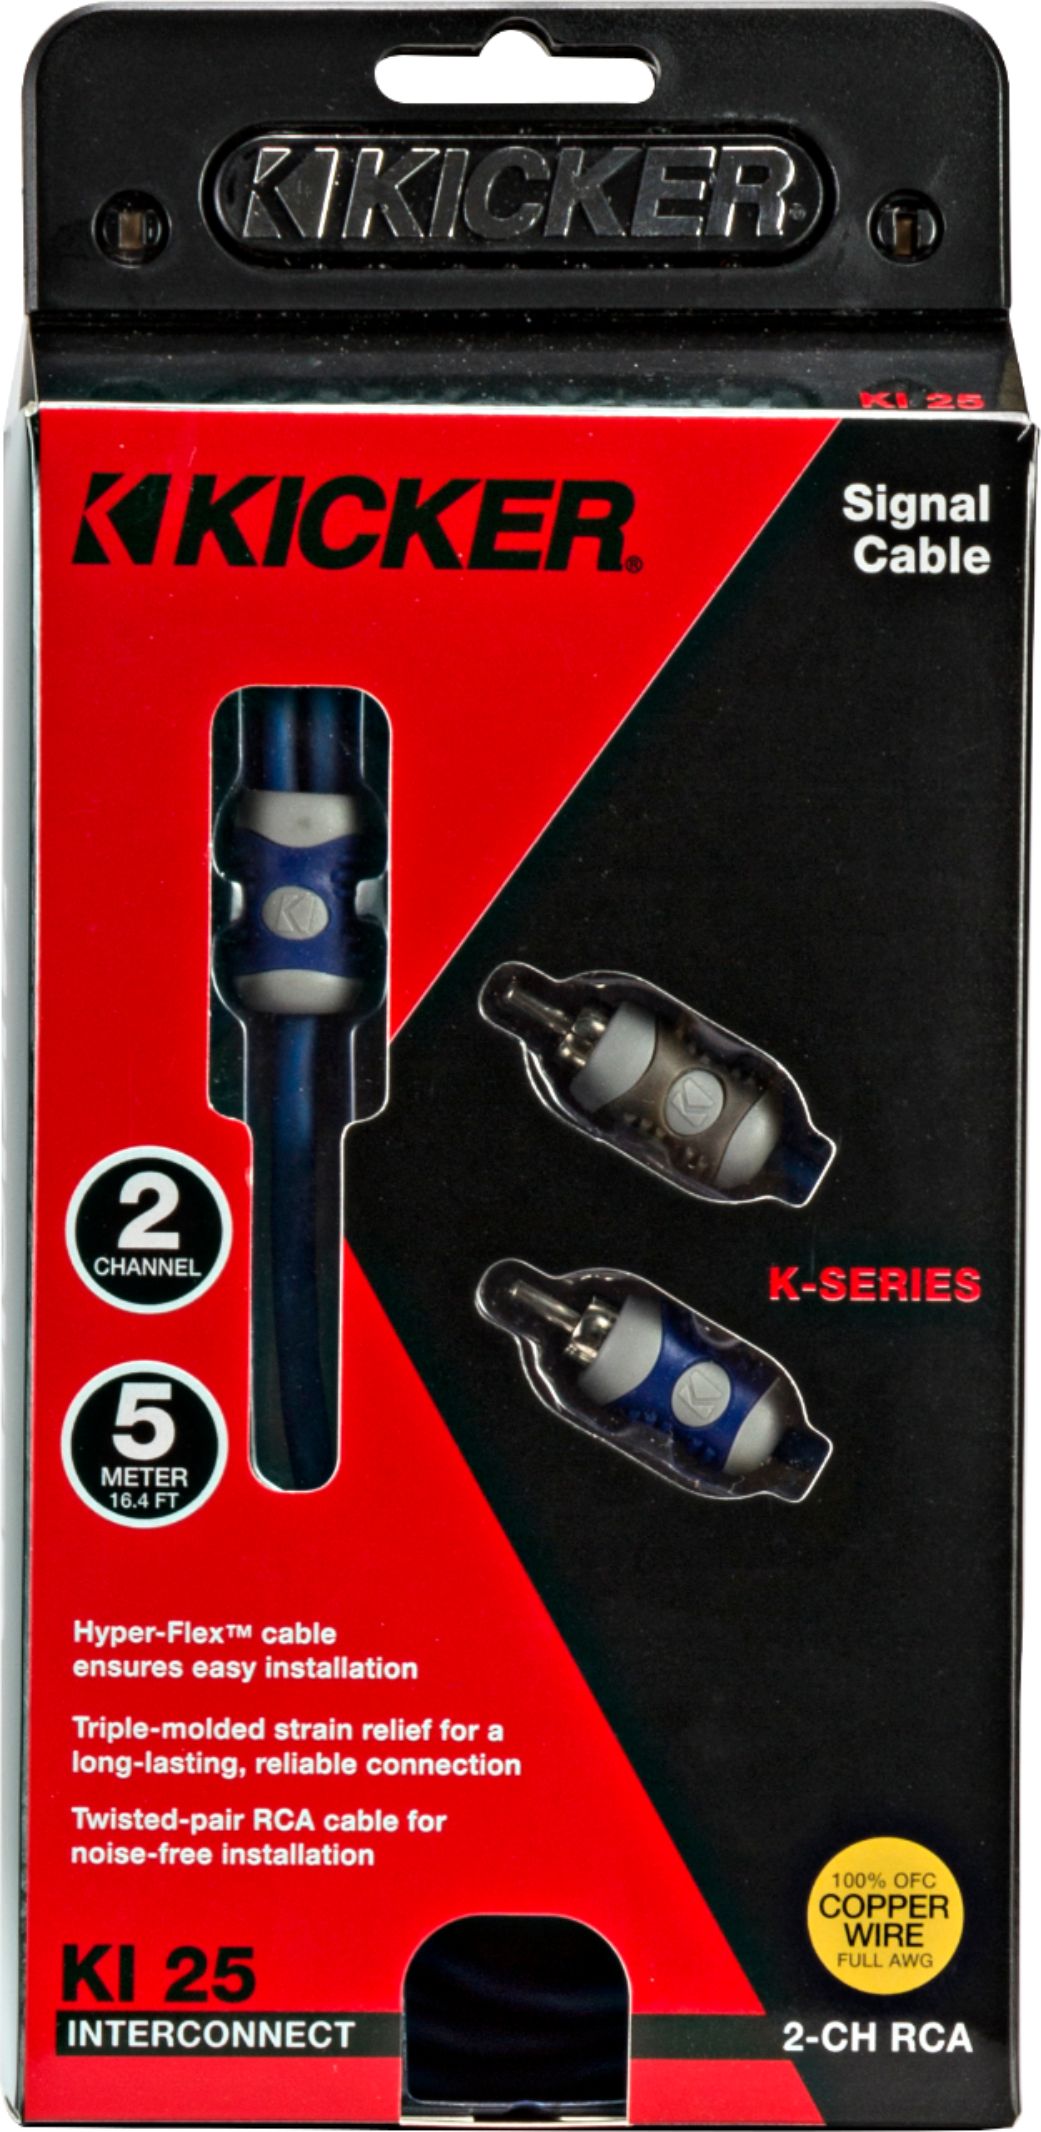 KICKER KI24 2-CHANNEL CH TWISTED PAIR RCA CAR AUDIO CABLE 13' 4-METER AMP WIRE